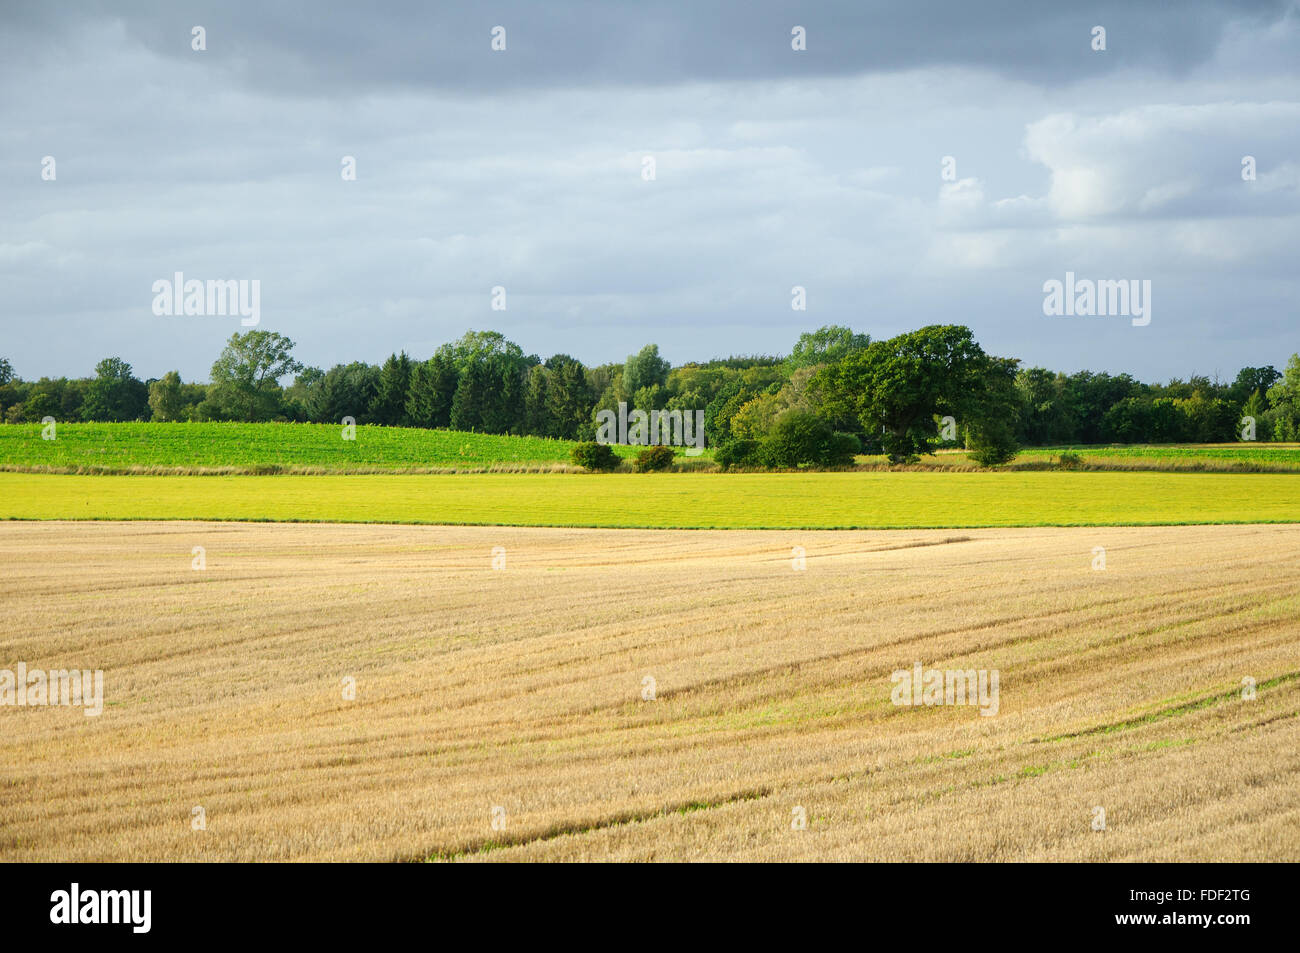 A sunlit field before a storm Stock Photo